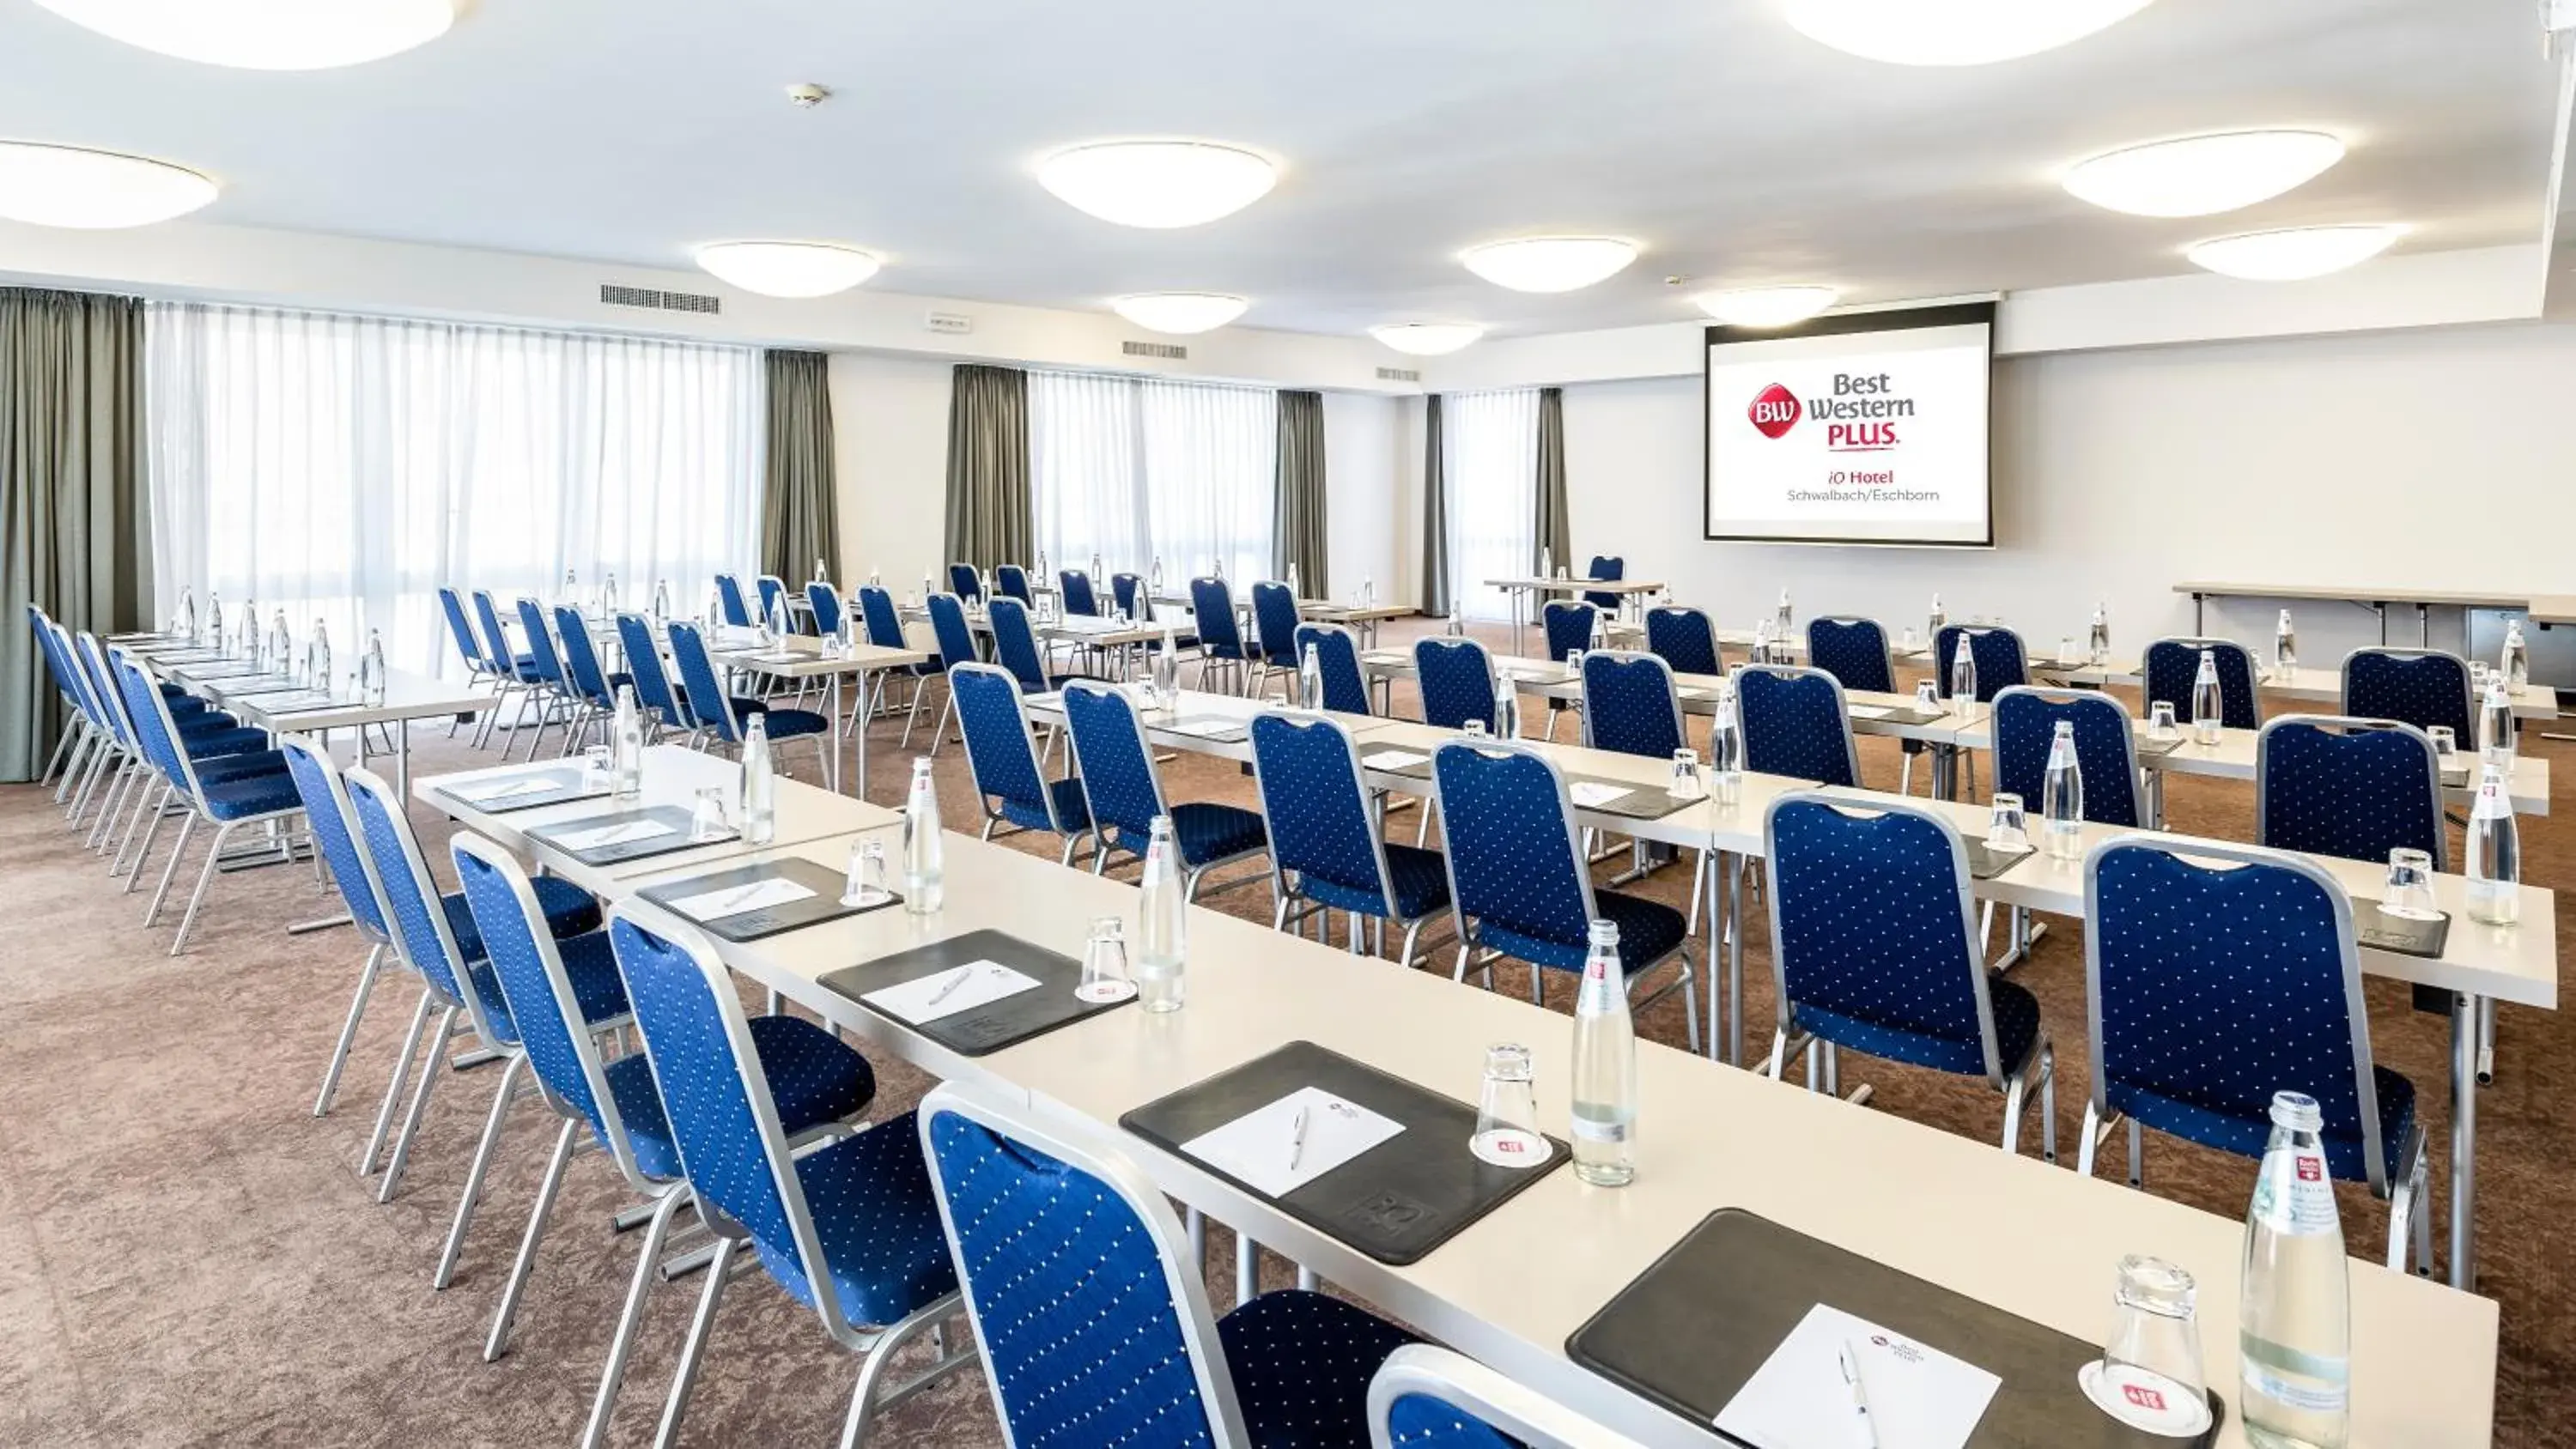 Meeting/conference room in Best Western Plus iO Hotel